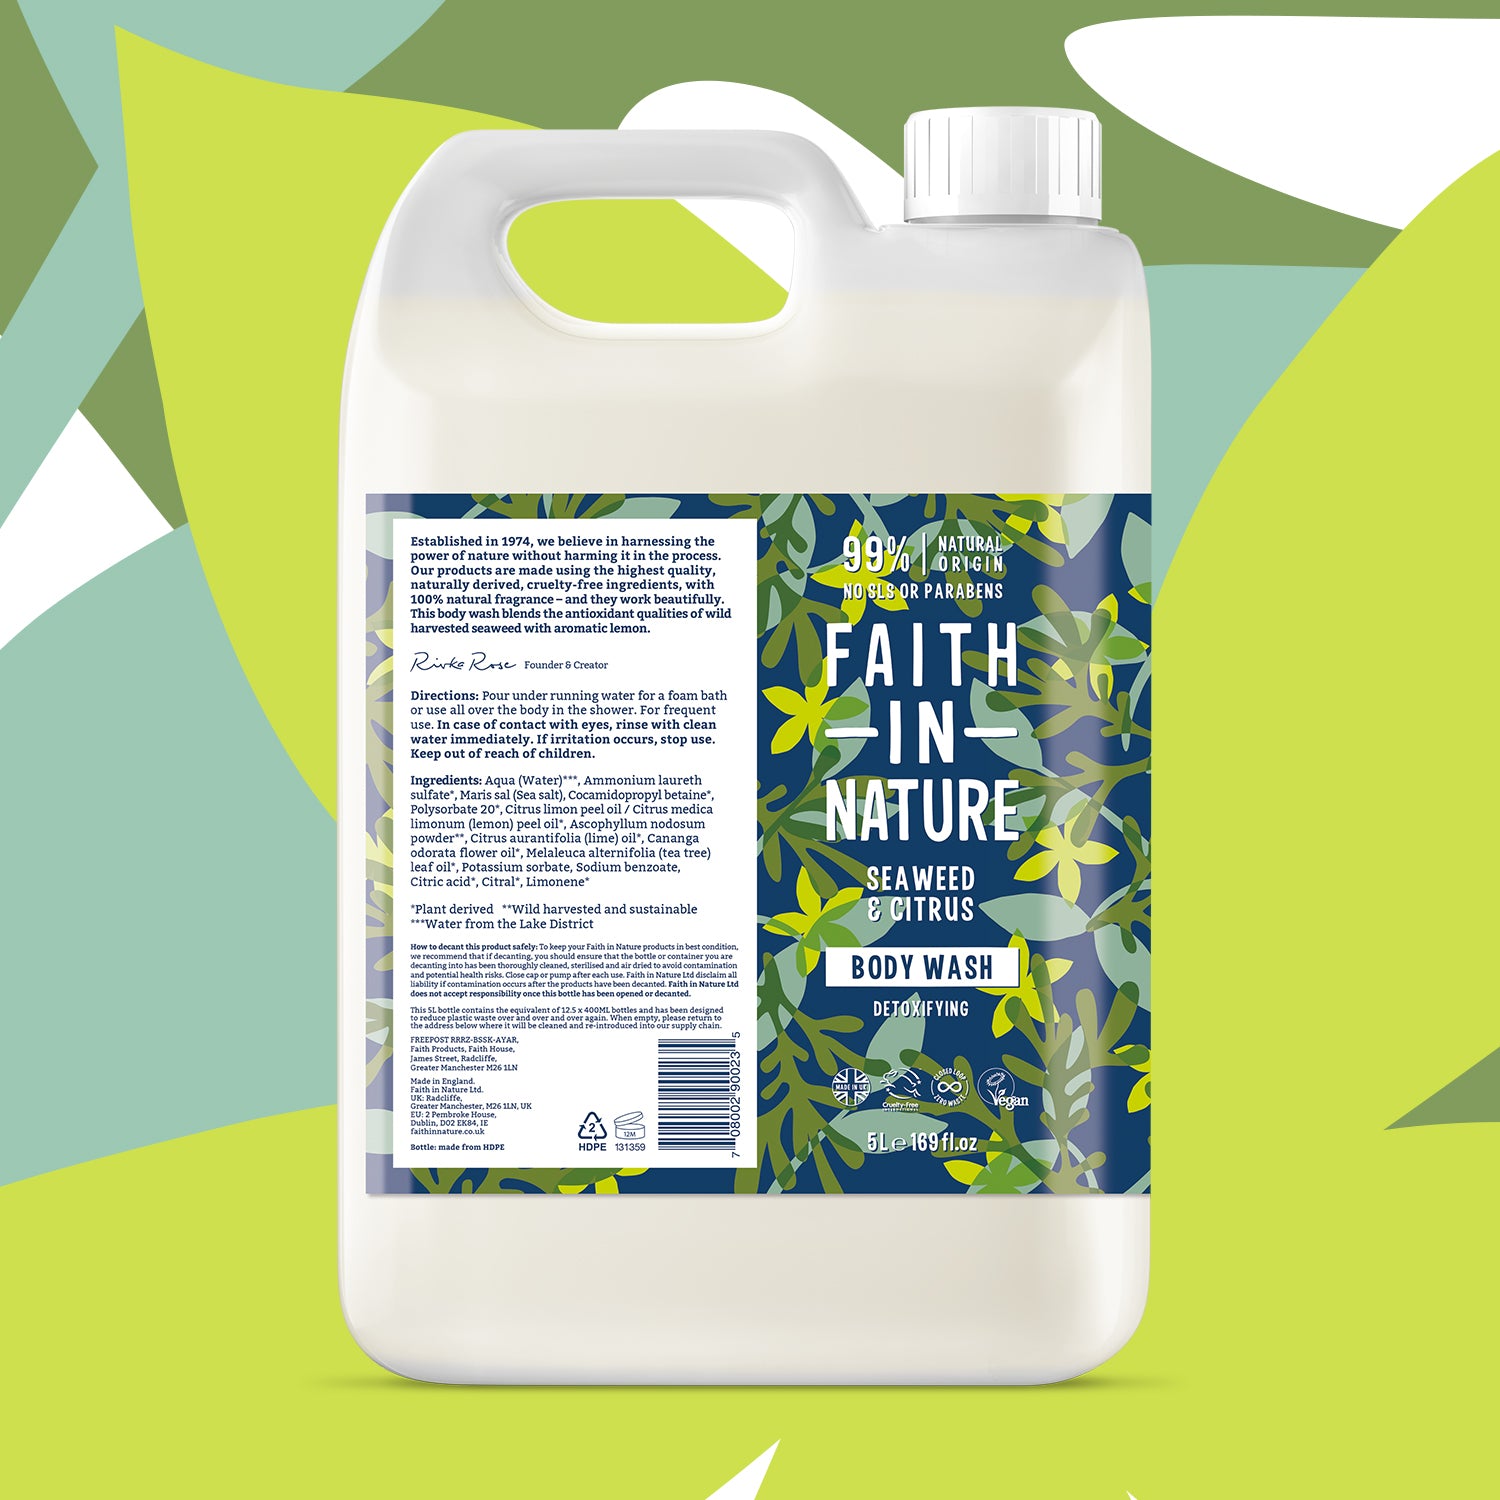 Faith In Nature Body Wash - Seaweed & Citrus 5 Litre Refill